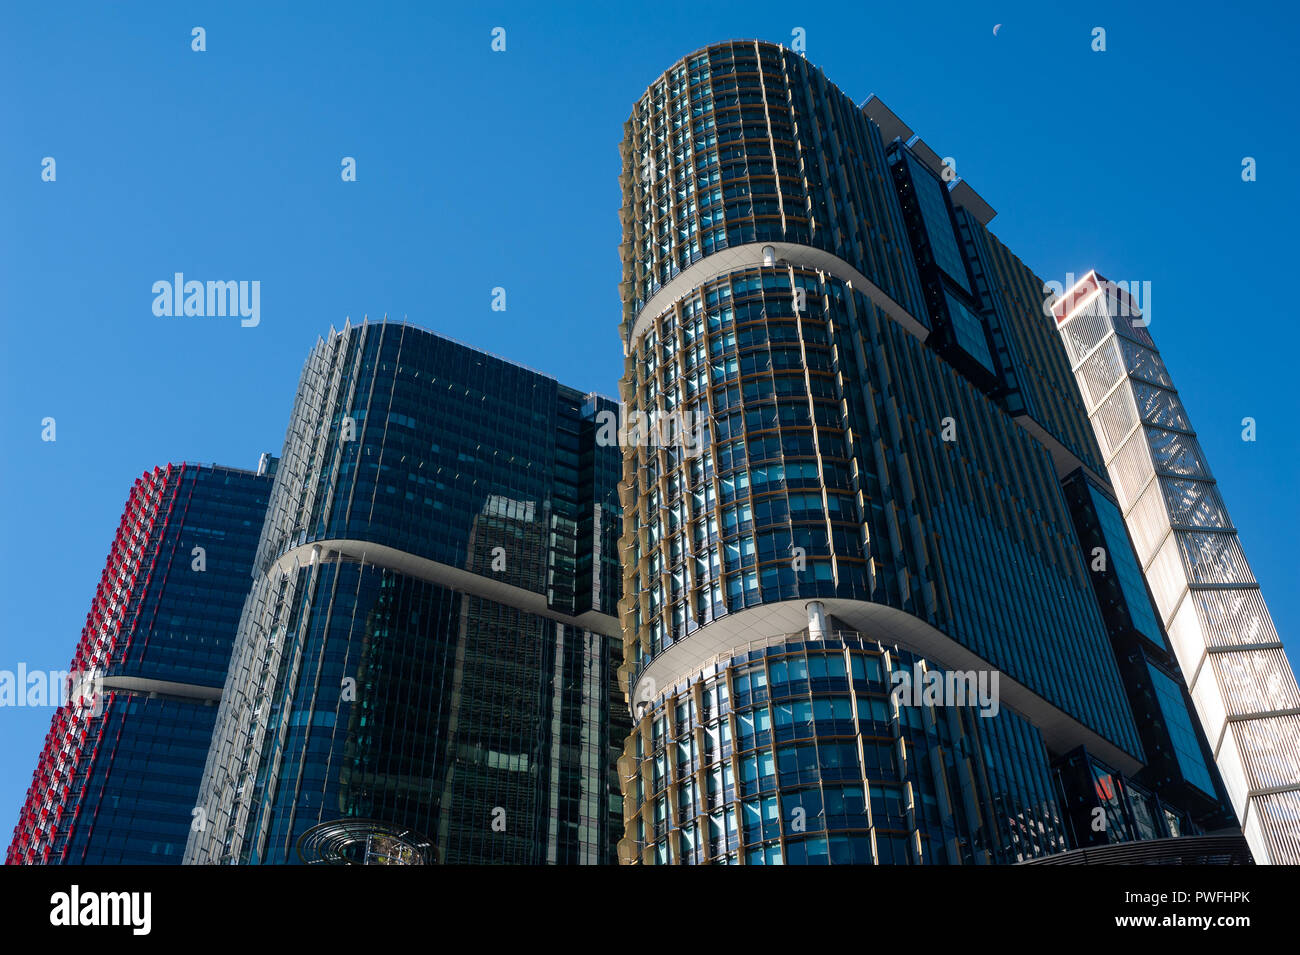 16.09.2018, Sydney, New South Wales, Australia - A view of the modern International Towers office buildings in Barangaroo. Stock Photo